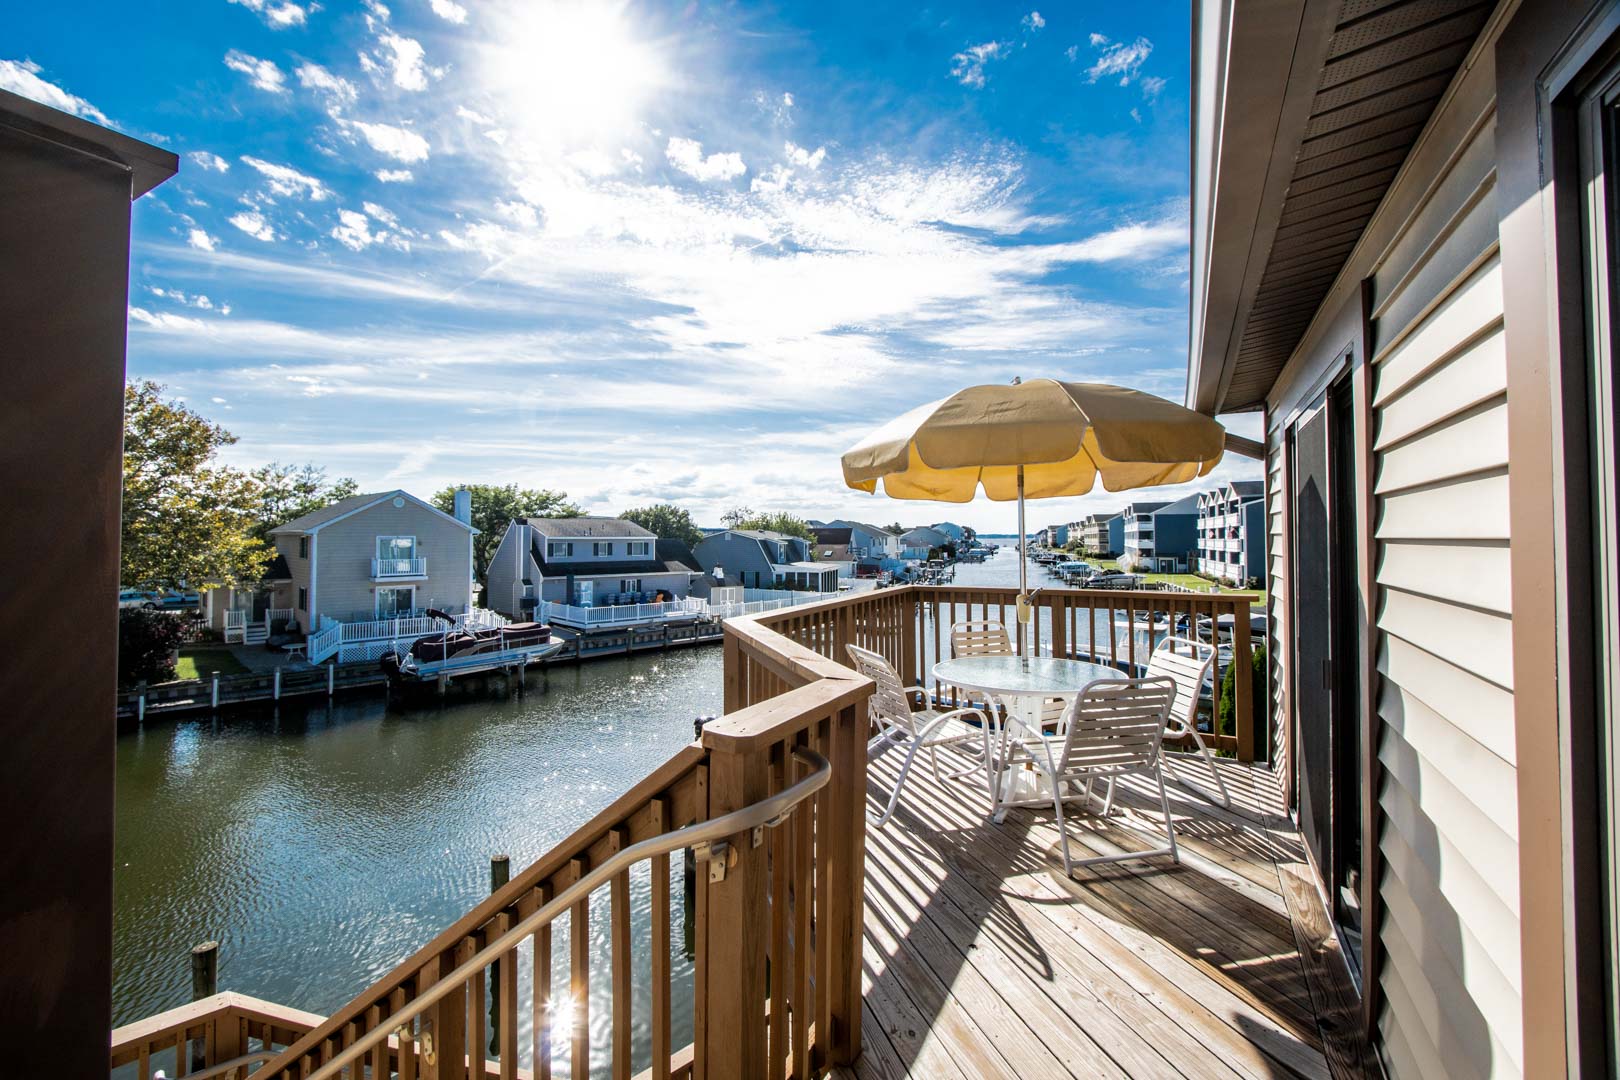 A scenic view from the patio area at VRI's Club Ocean Villas II in Ocean City, Maryland.